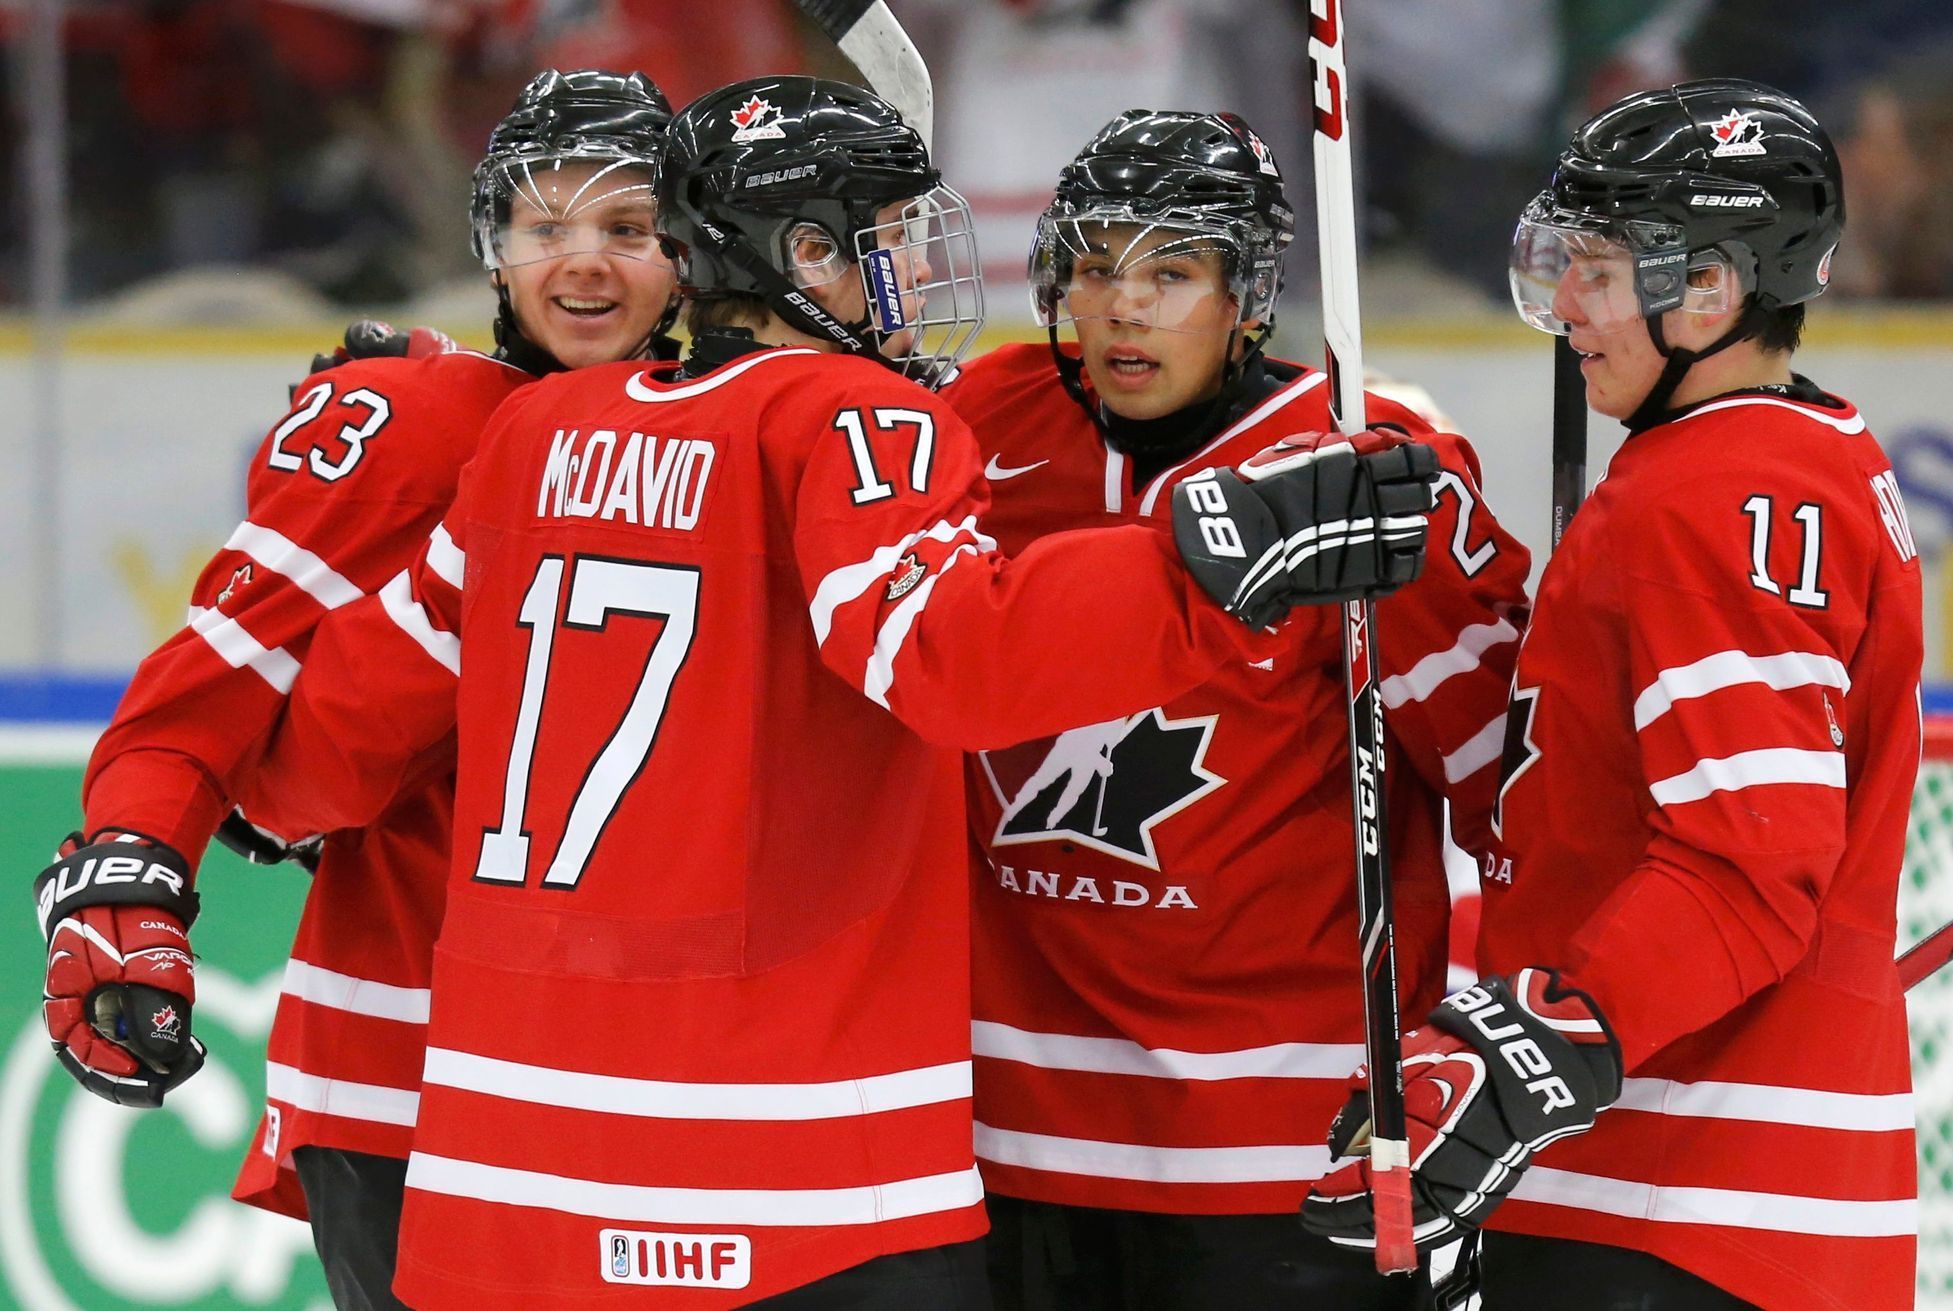 Canada's Reinhart celebrates his goal against the Czech Republic with teammates McDavid, Horvat and Dumba during the first period of their IIHF World Junior Championship ice hockey game in Malmo